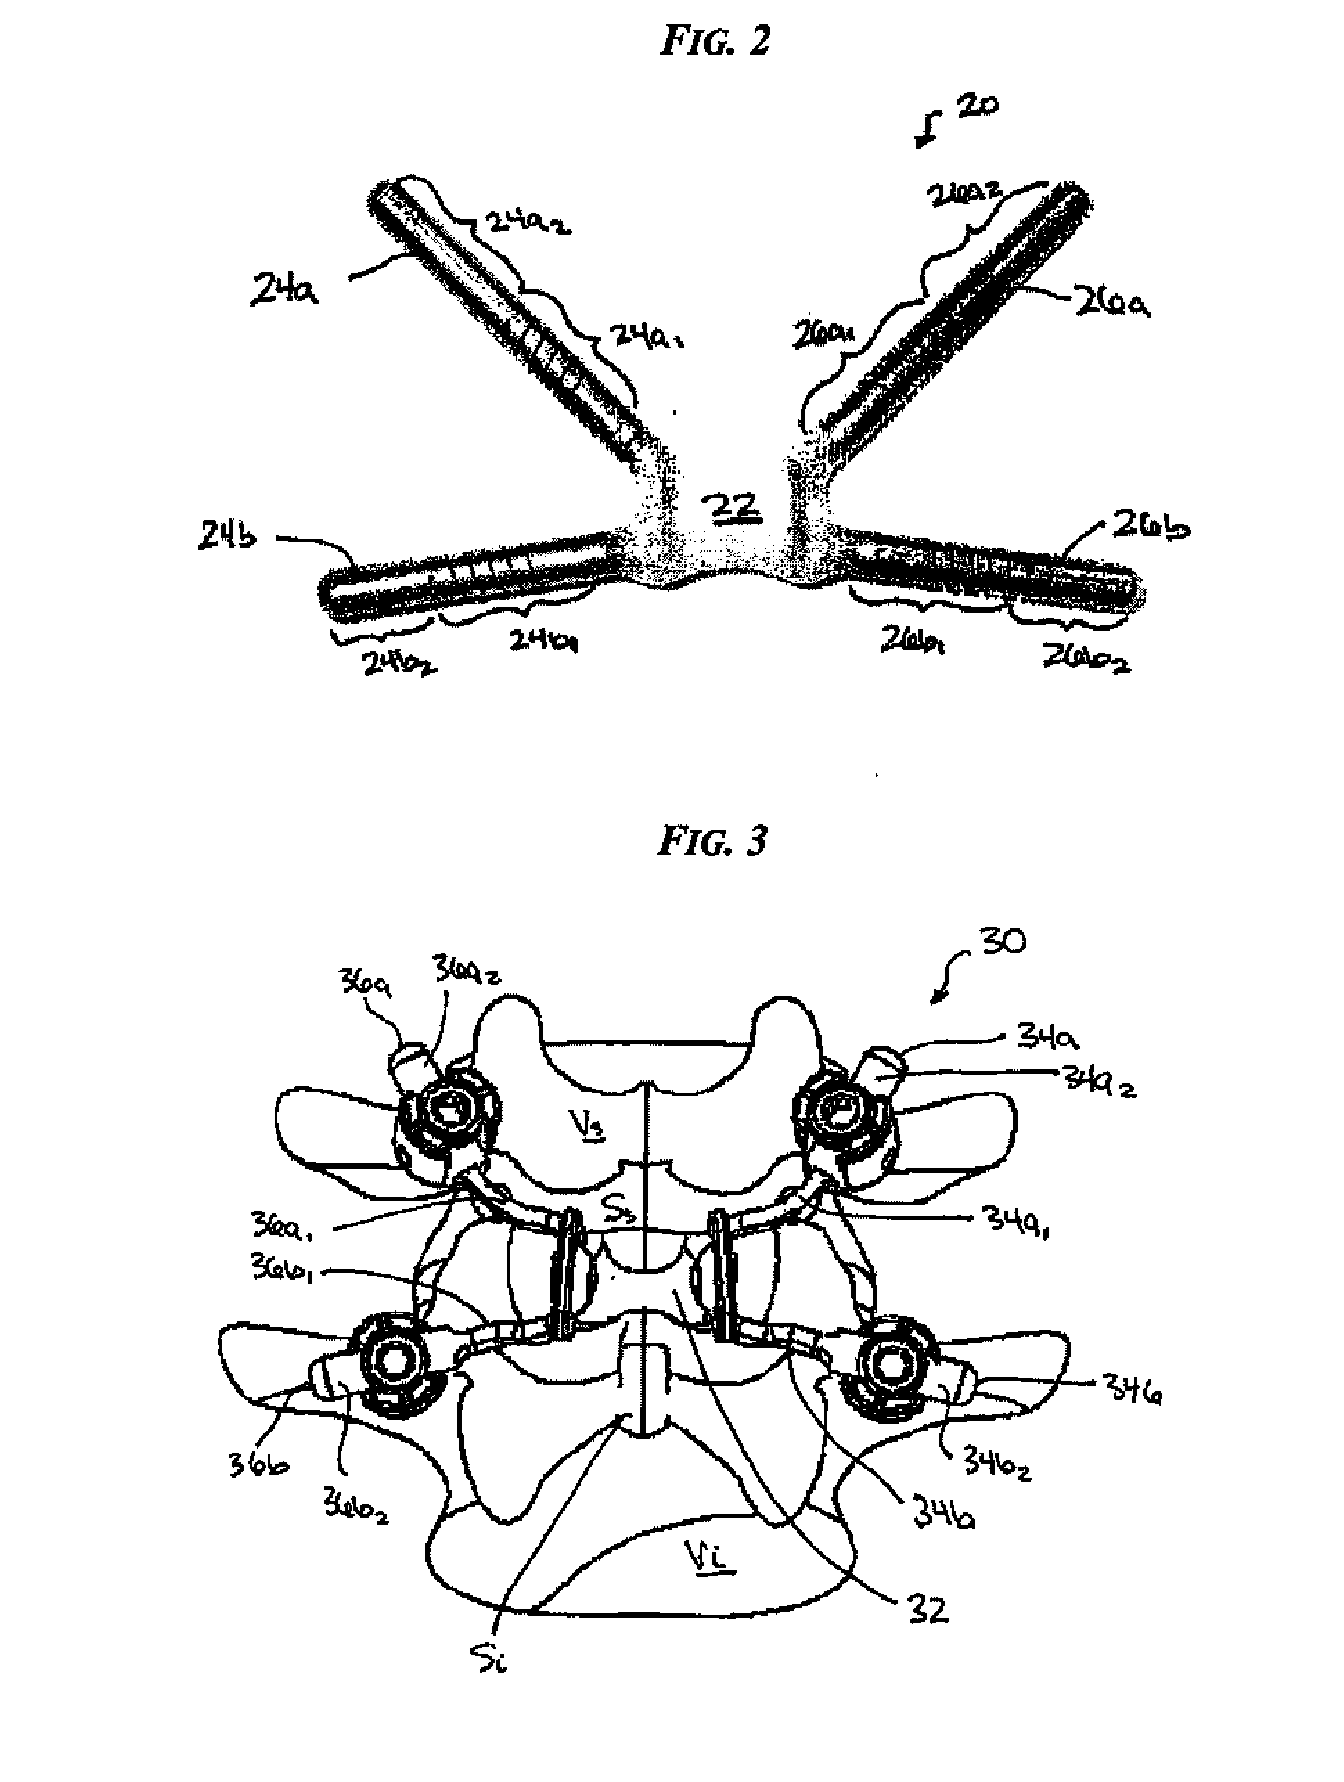 Posterior dynamic stabilization cross connectors